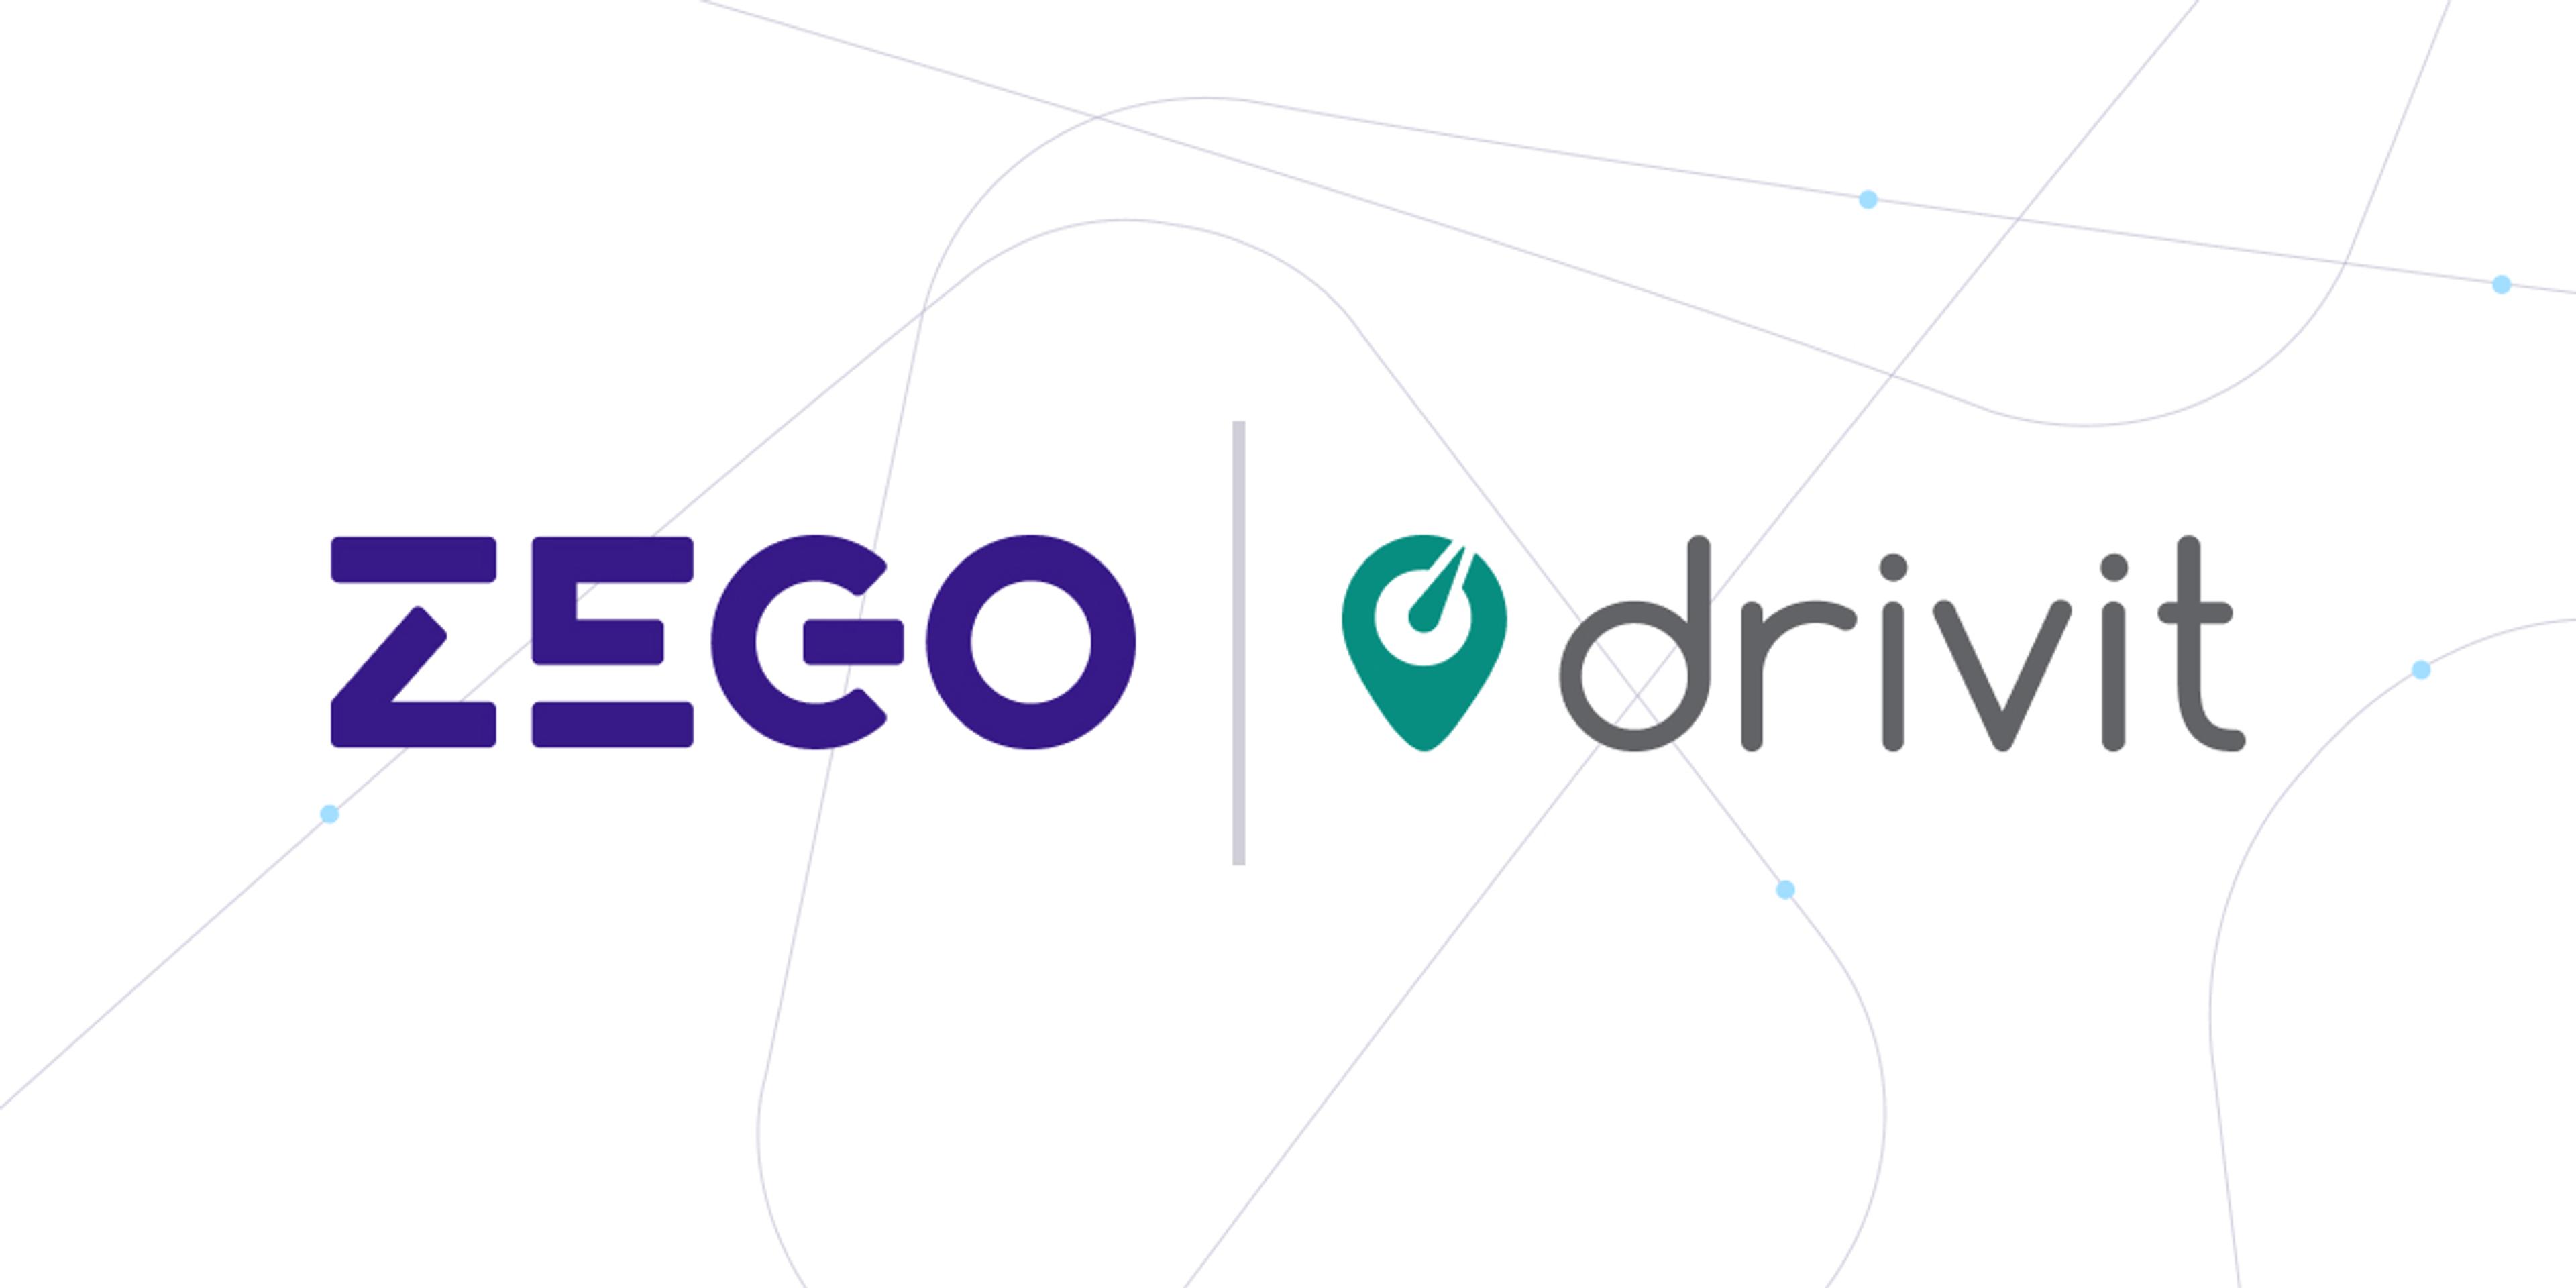 Zego and Drivit logos